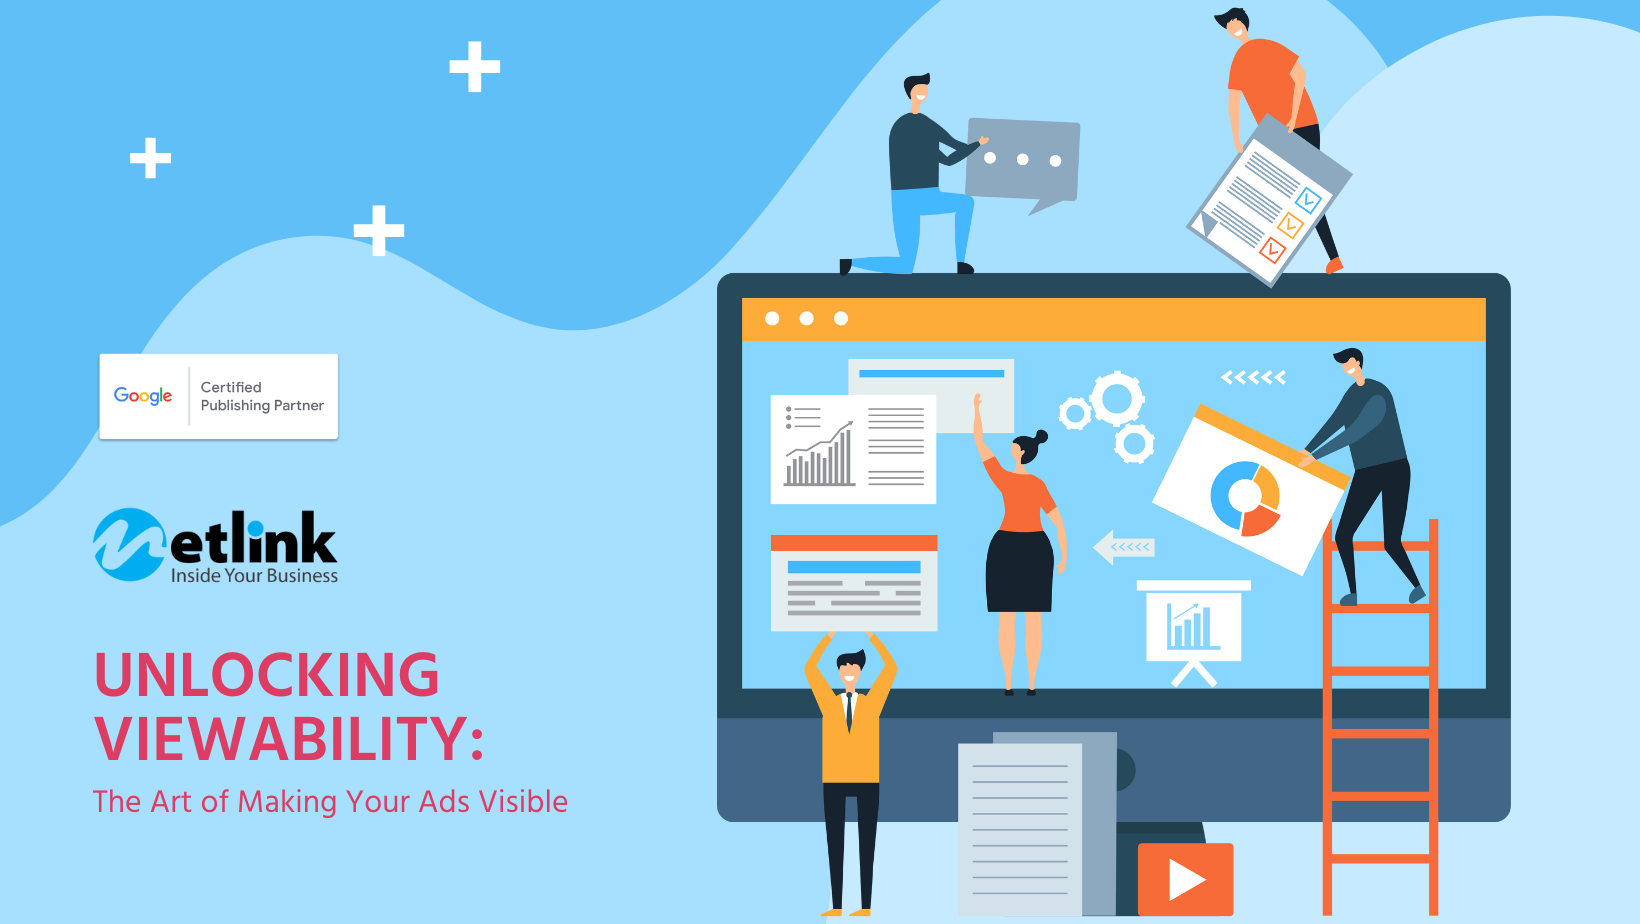 Unlocking Viewability: The Art of Making Your Ads Visible